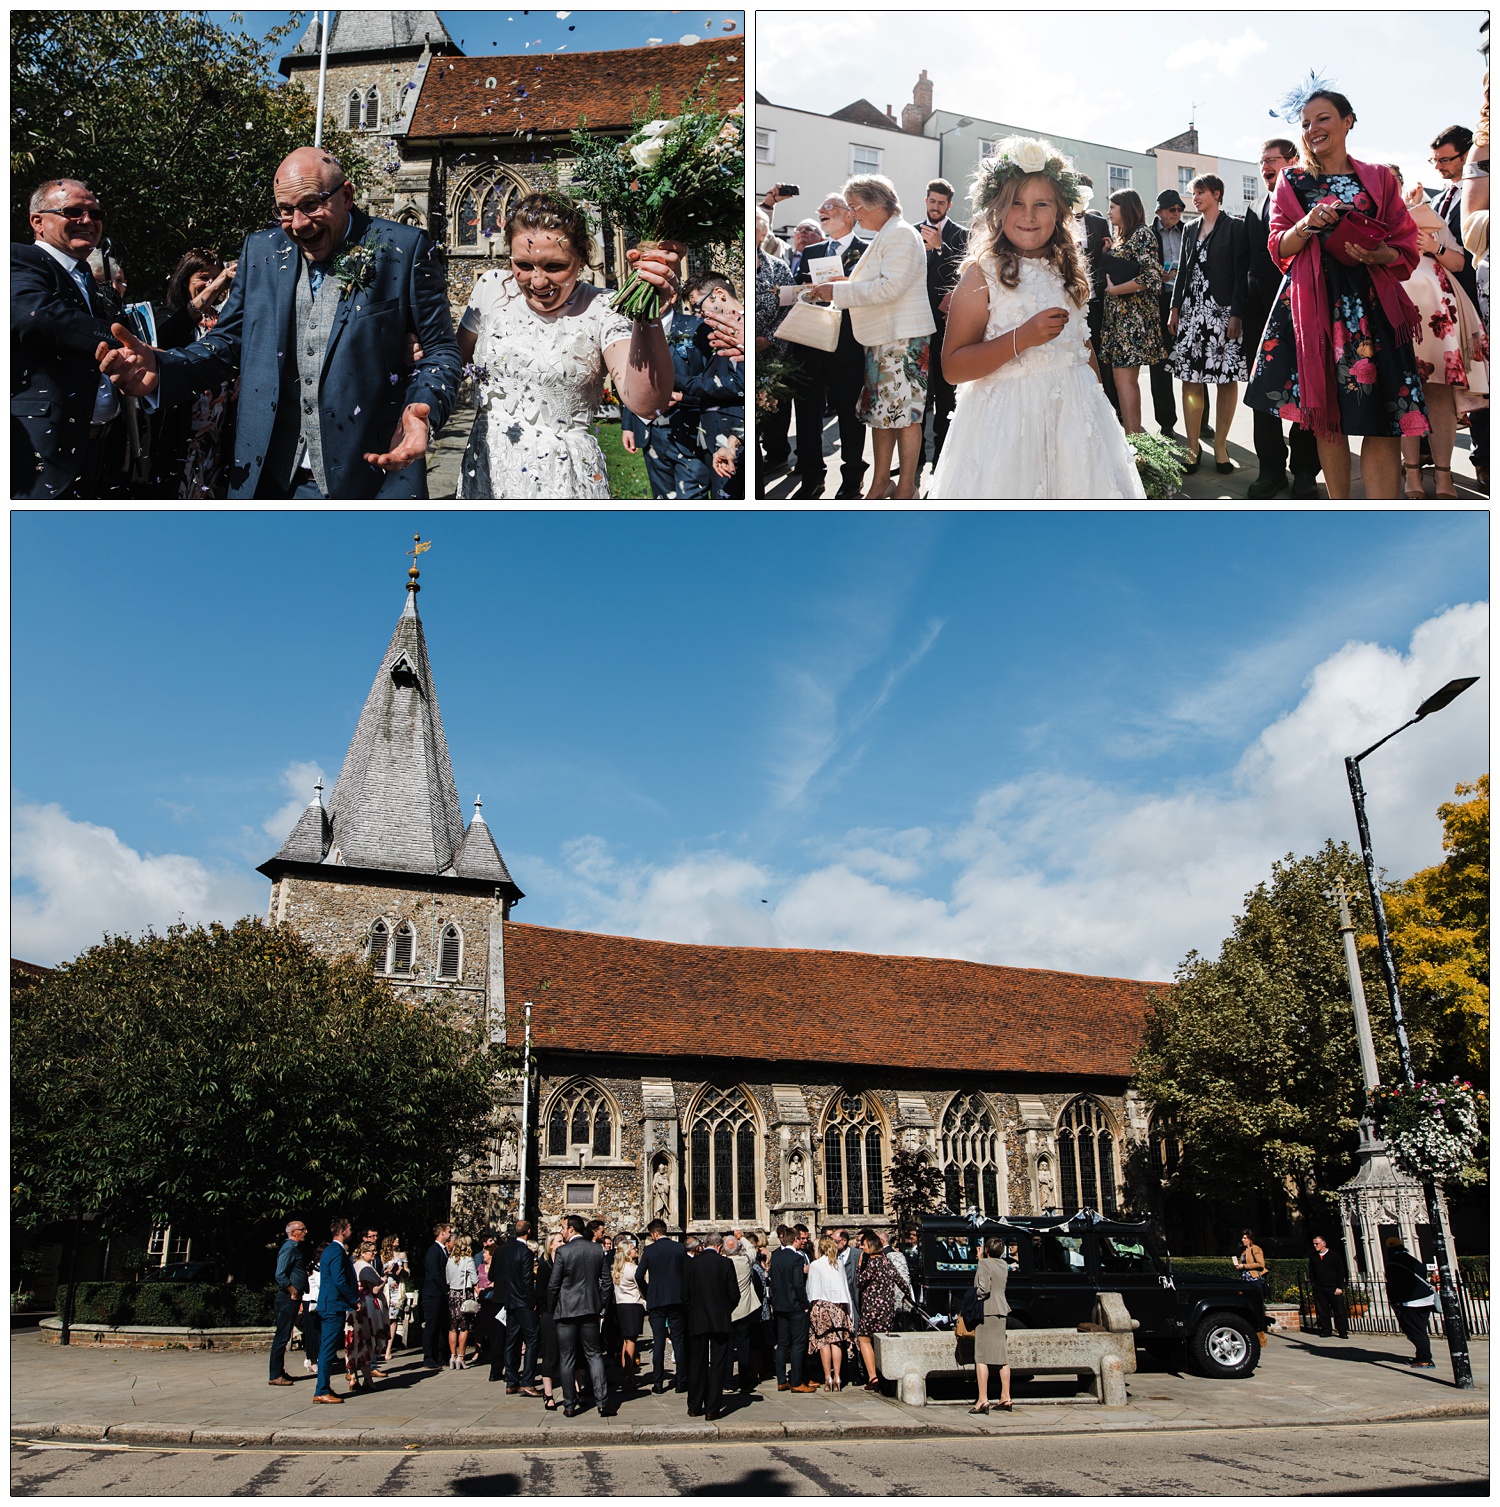 People gathering outside St Peter's Church in Maldon after a wedding.